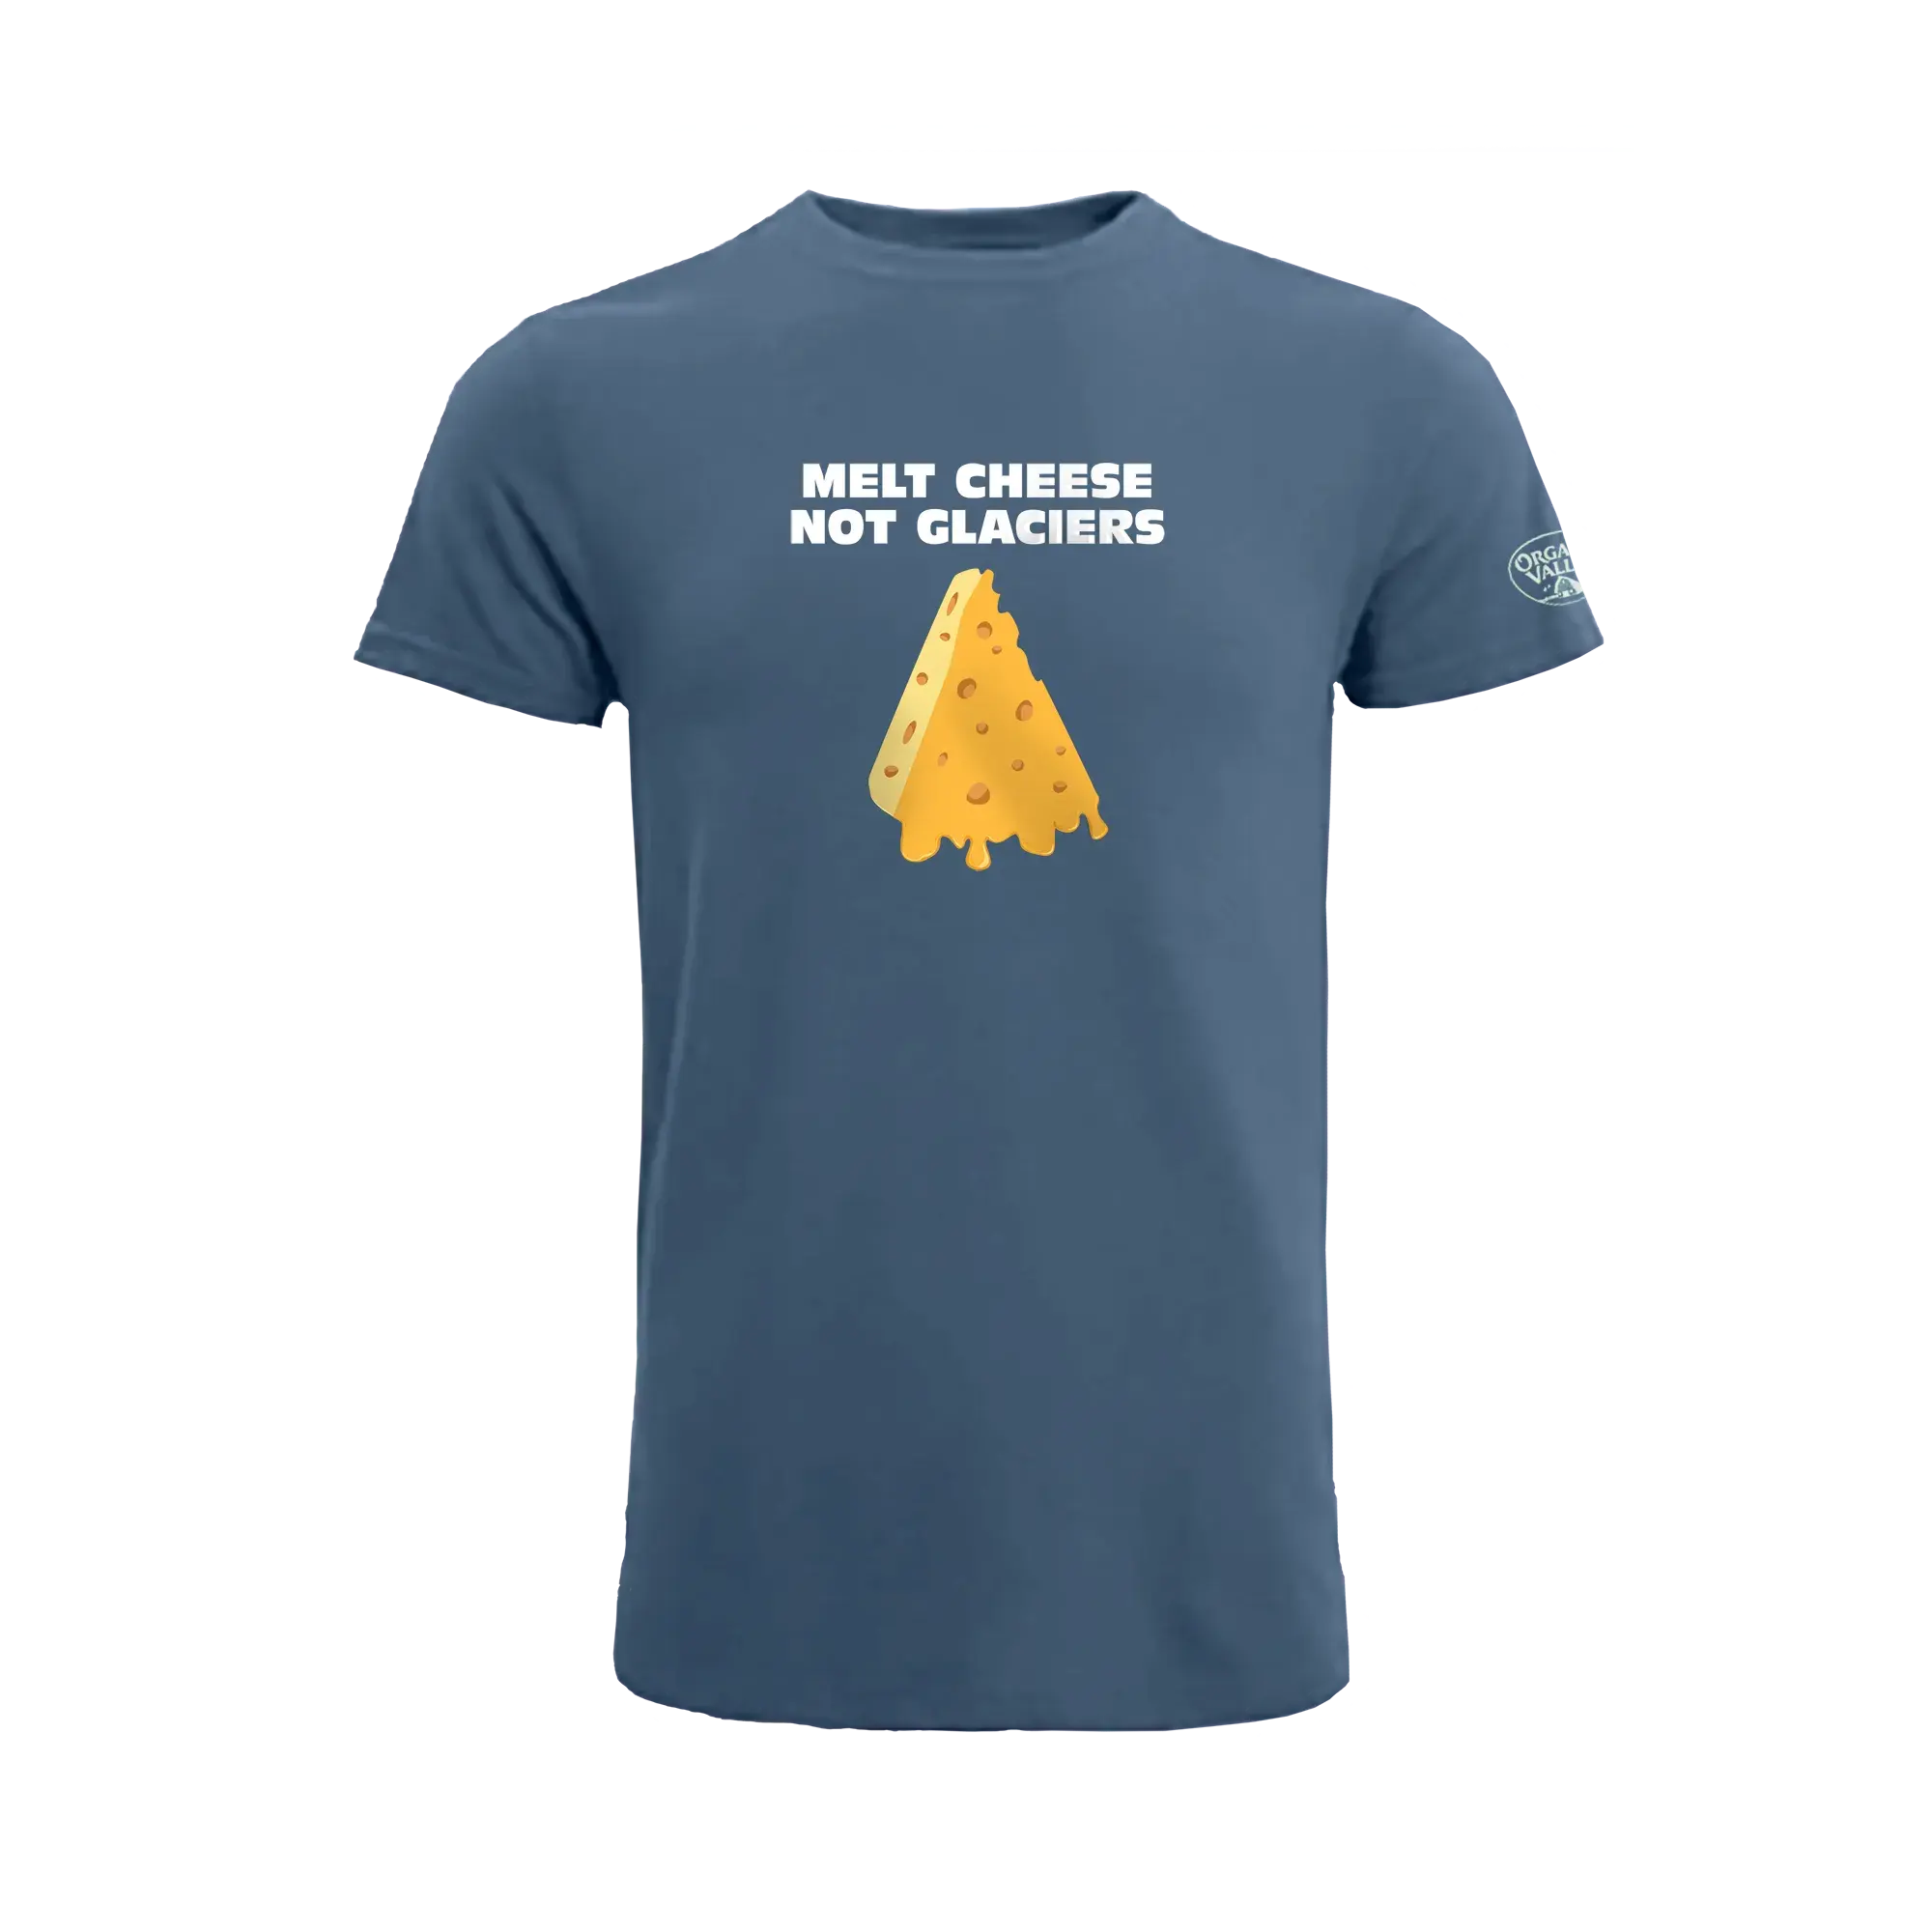 Visit the Melt Cheese Tee Product Page